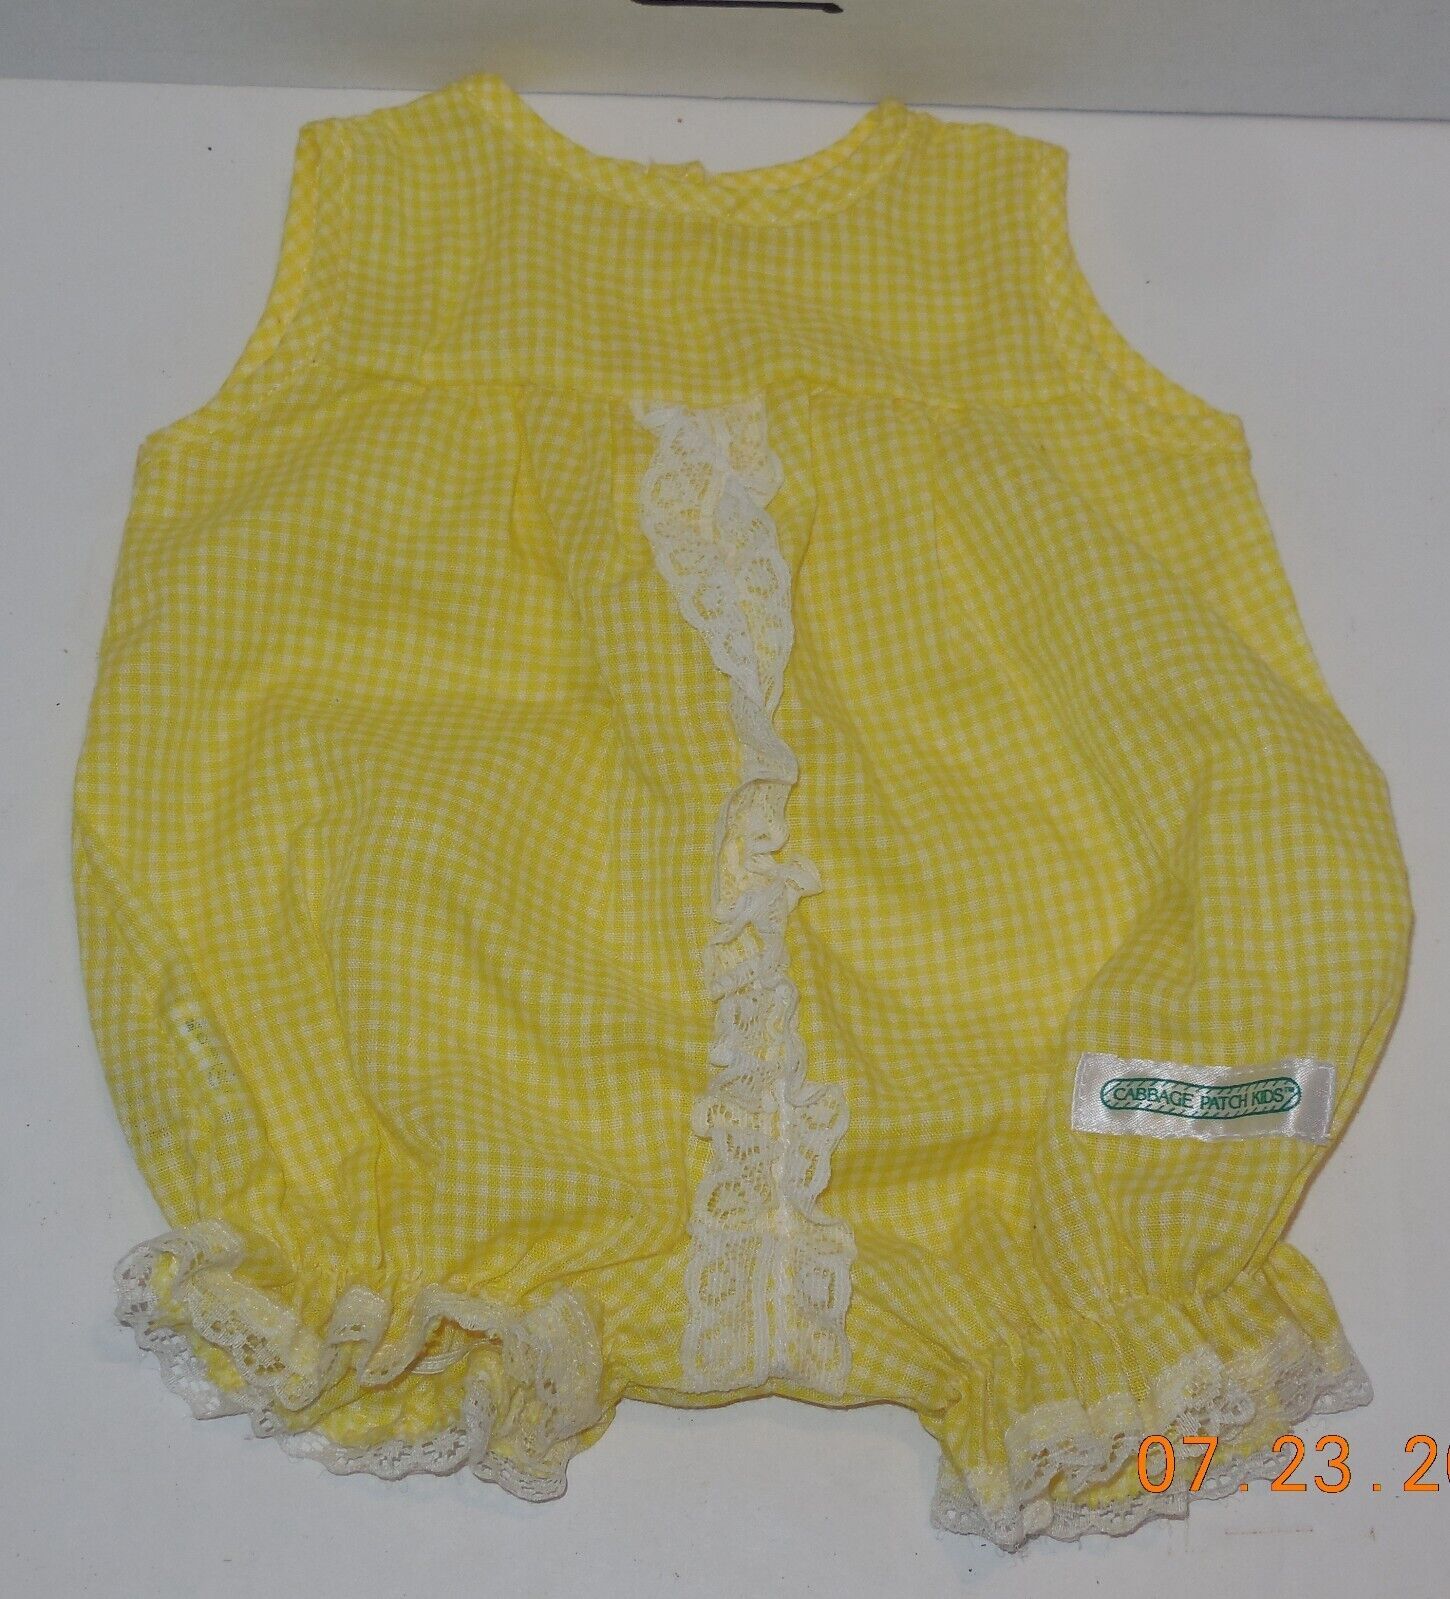 1980's Coleco Cabbage Patch Kids Yellow Romper Outfit CPK Xavier Roberts OAA - $24.39